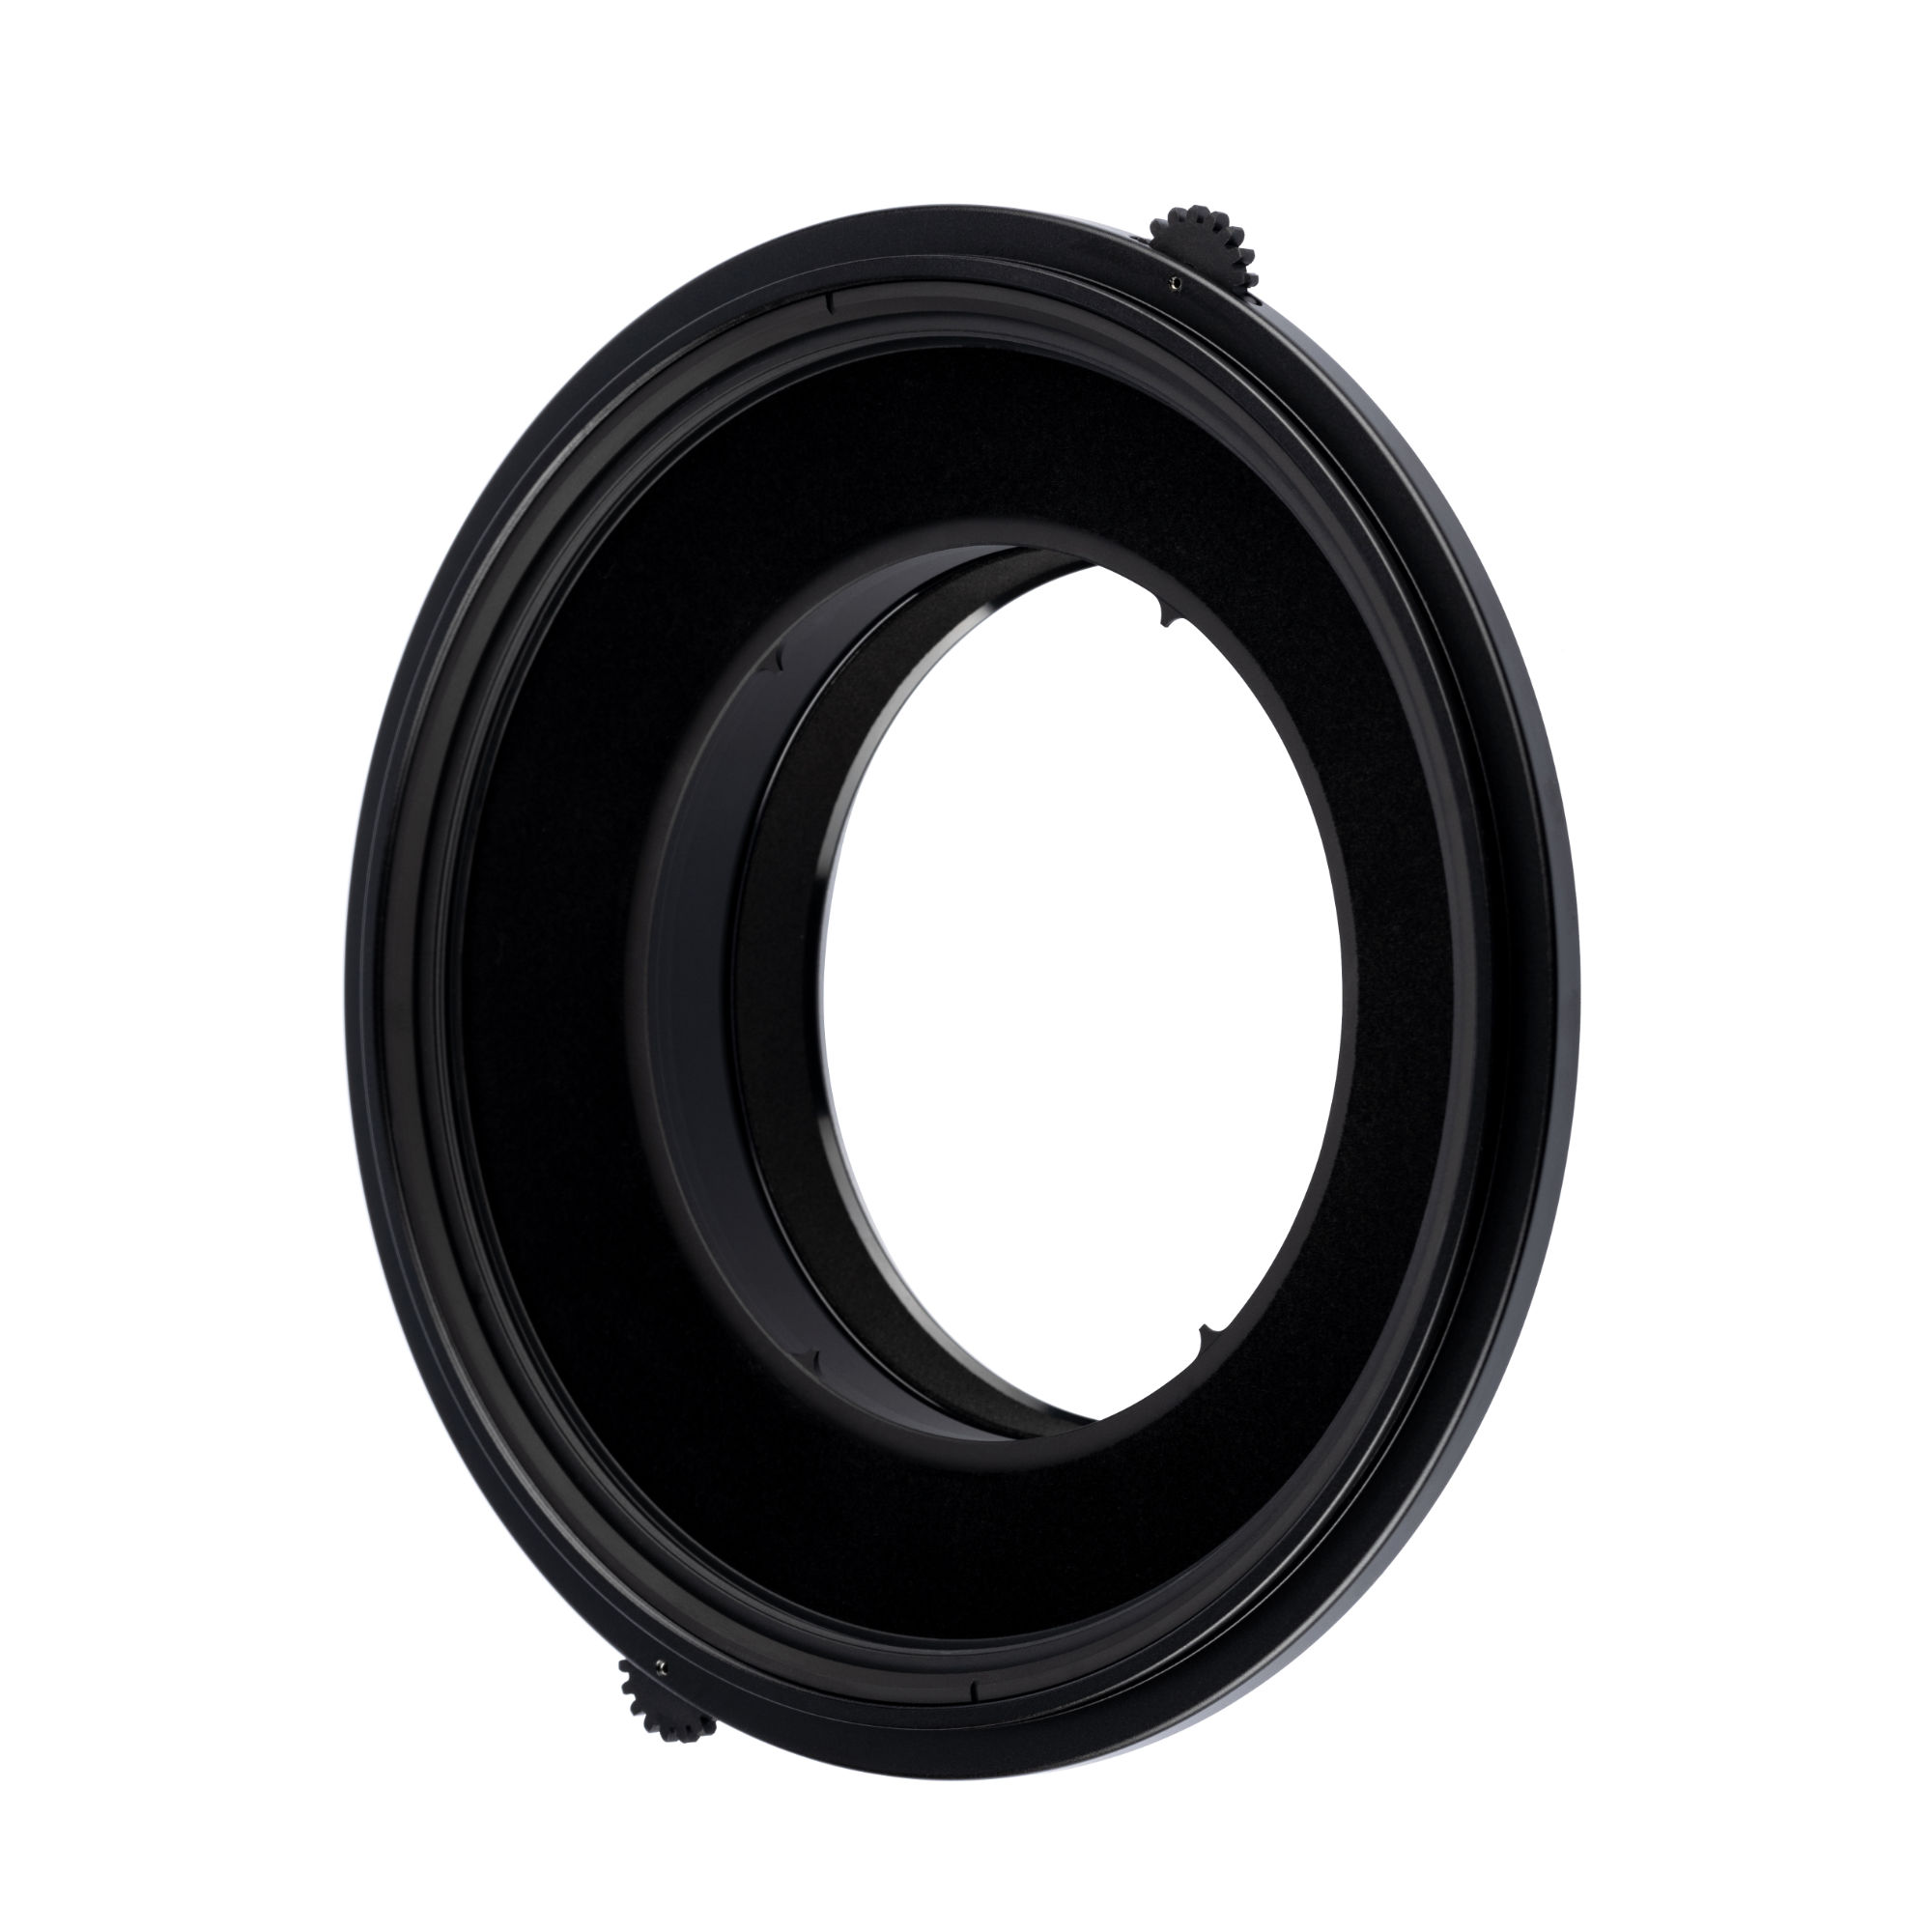 NiSi S6 150mm Filter Holder Kit with Pro CPL for Sigma 14mm f/1.8 DG HSM  Art | NiSi Optics USA